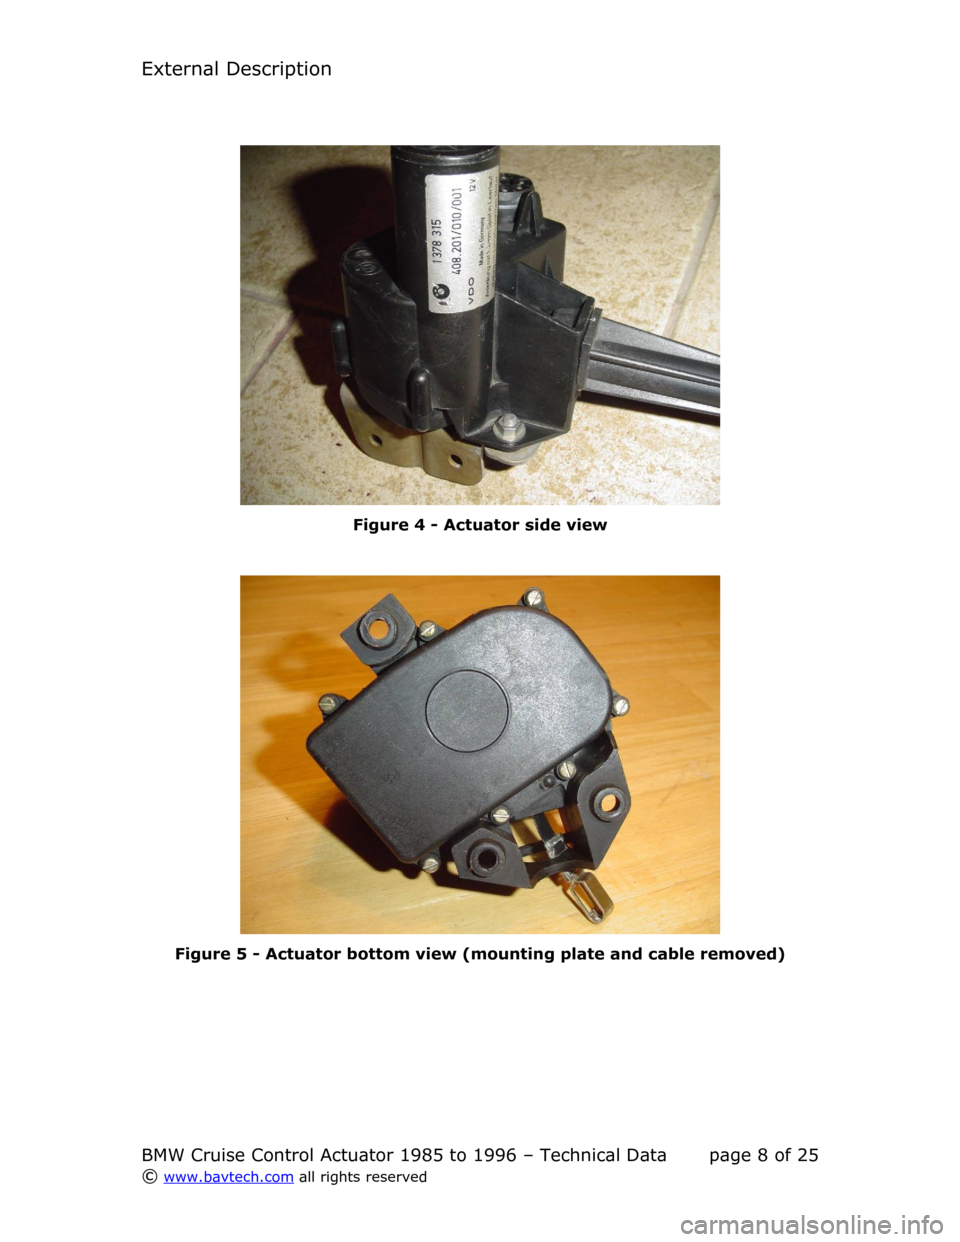 BMW 3 SERIES 1996 E36 Cruise Control Acutator External Description
Figure  4  - Actuator side view
Figure  5  - Actuator bottom view (mounting plate and cable removed)
BMW Cruise Control Actuator 1985 to 1996 – Technical Data page  8  of  25
©